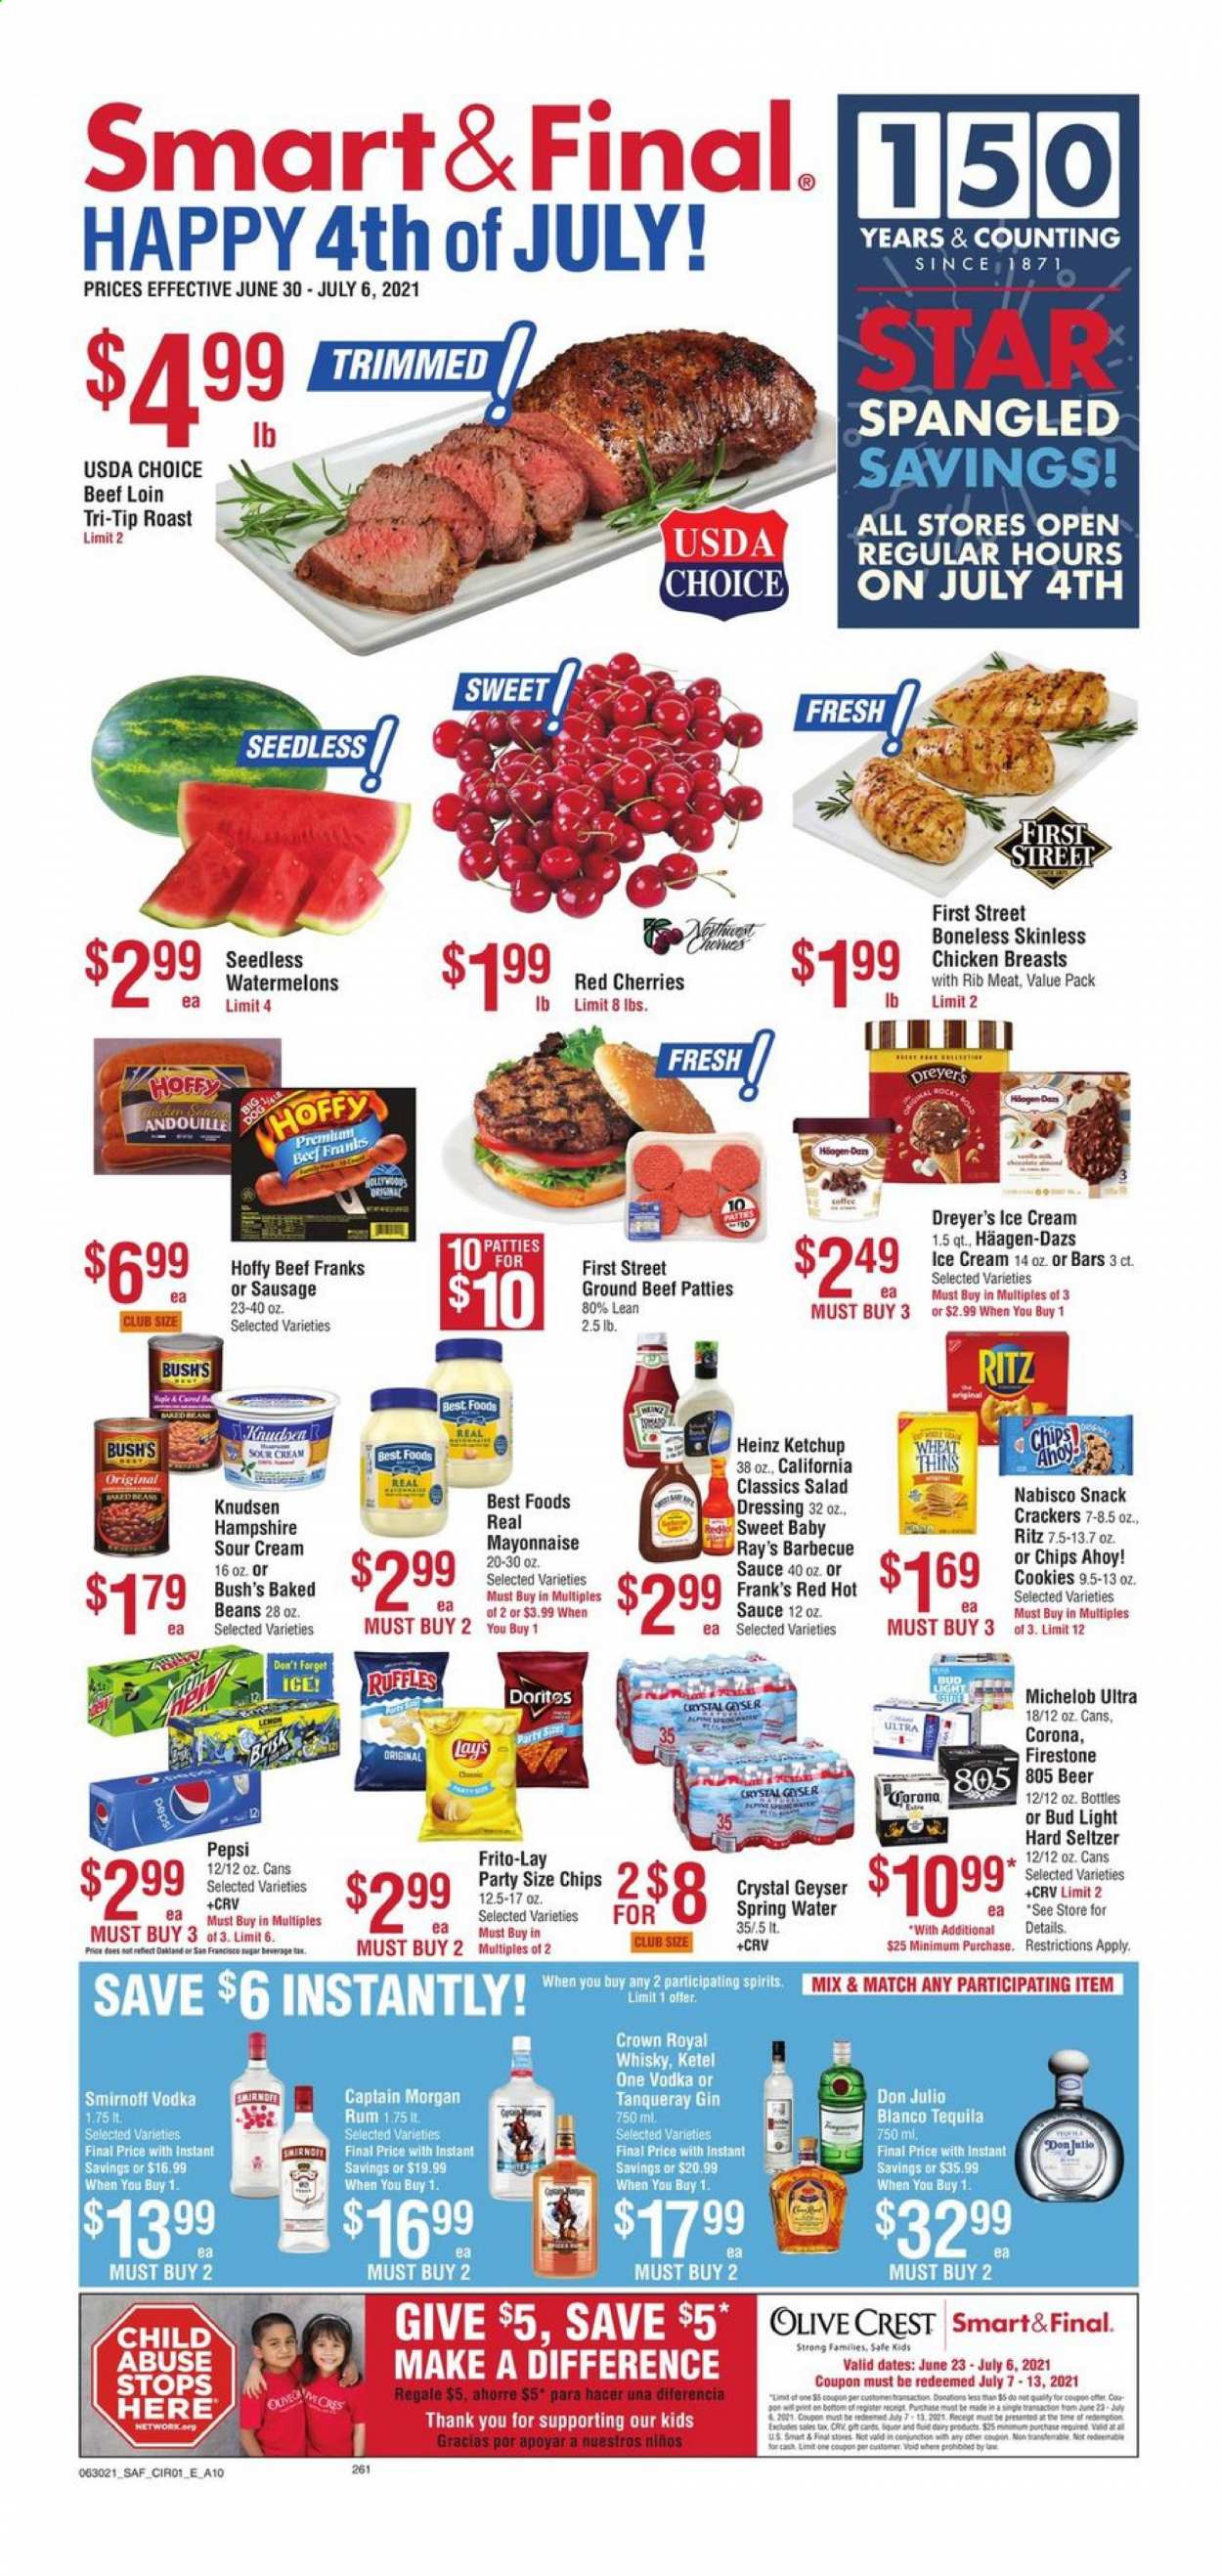 thumbnail - Smart & Final Flyer - 06/30/2021 - 07/06/2021 - Sales products - Michelob, beans, cherries, sauce, sausage, curd, sour cream, mayonnaise, ice cream, Häagen-Dazs, cookies, snack, crackers, Chips Ahoy!, RITZ, Doritos, chips, Lay’s, Thins, Frito-Lay, Ruffles, sugar, Heinz, baked beans, BBQ sauce, salad dressing, hot sauce, ketchup, dressing, Pepsi, spring water, Captain Morgan, gin, rum, Smirnoff, tequila, vodka, Hard Seltzer, whisky, beer, Bud Light, Corona Extra, chicken breasts, beef meat, ground beef. Page 1.